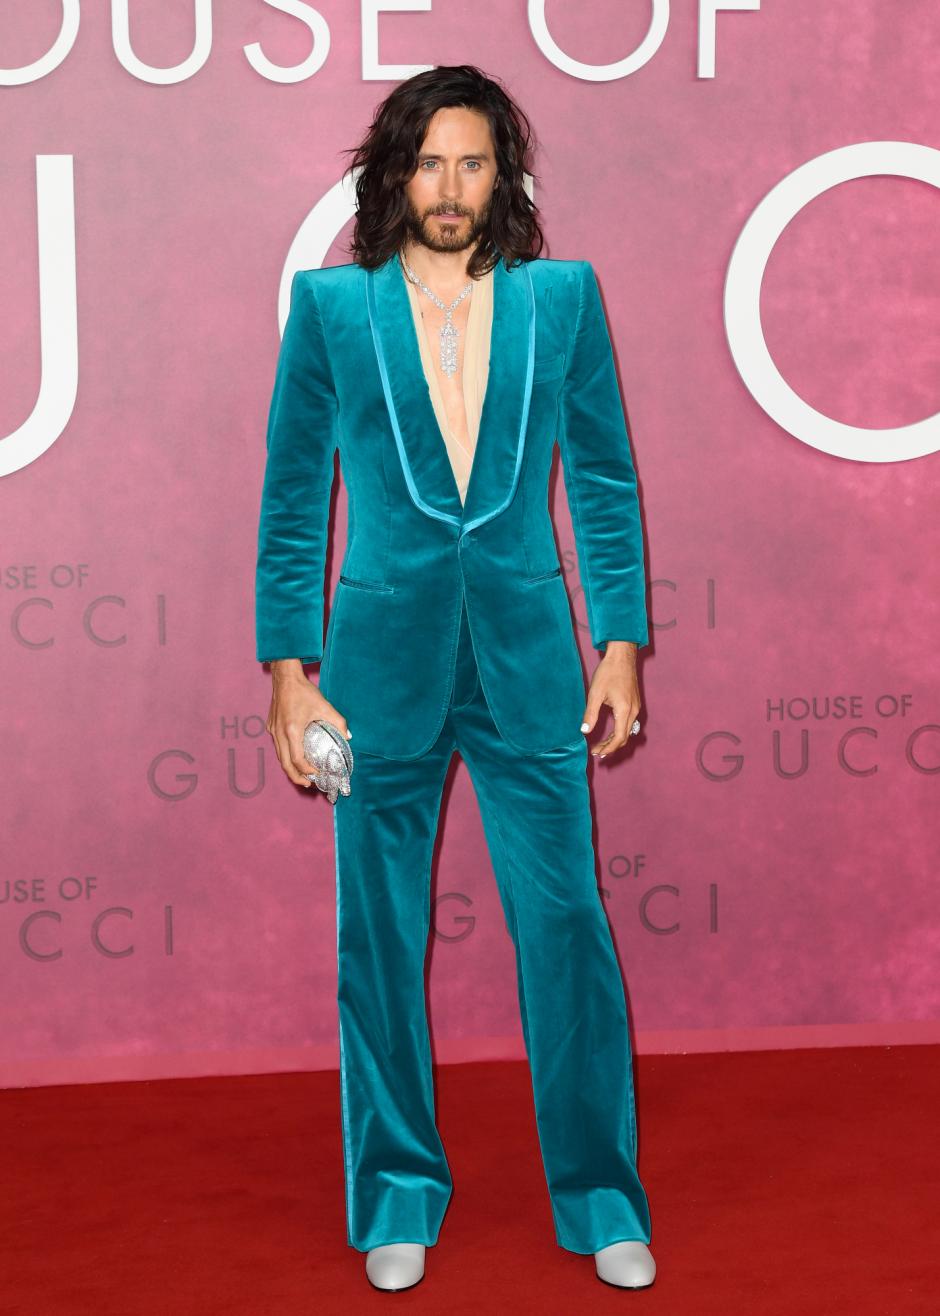 Actor and singer Jared Leto at the World premiere of the film 'House of Gucci' in London Tuesday, Nov. 9, 2021.